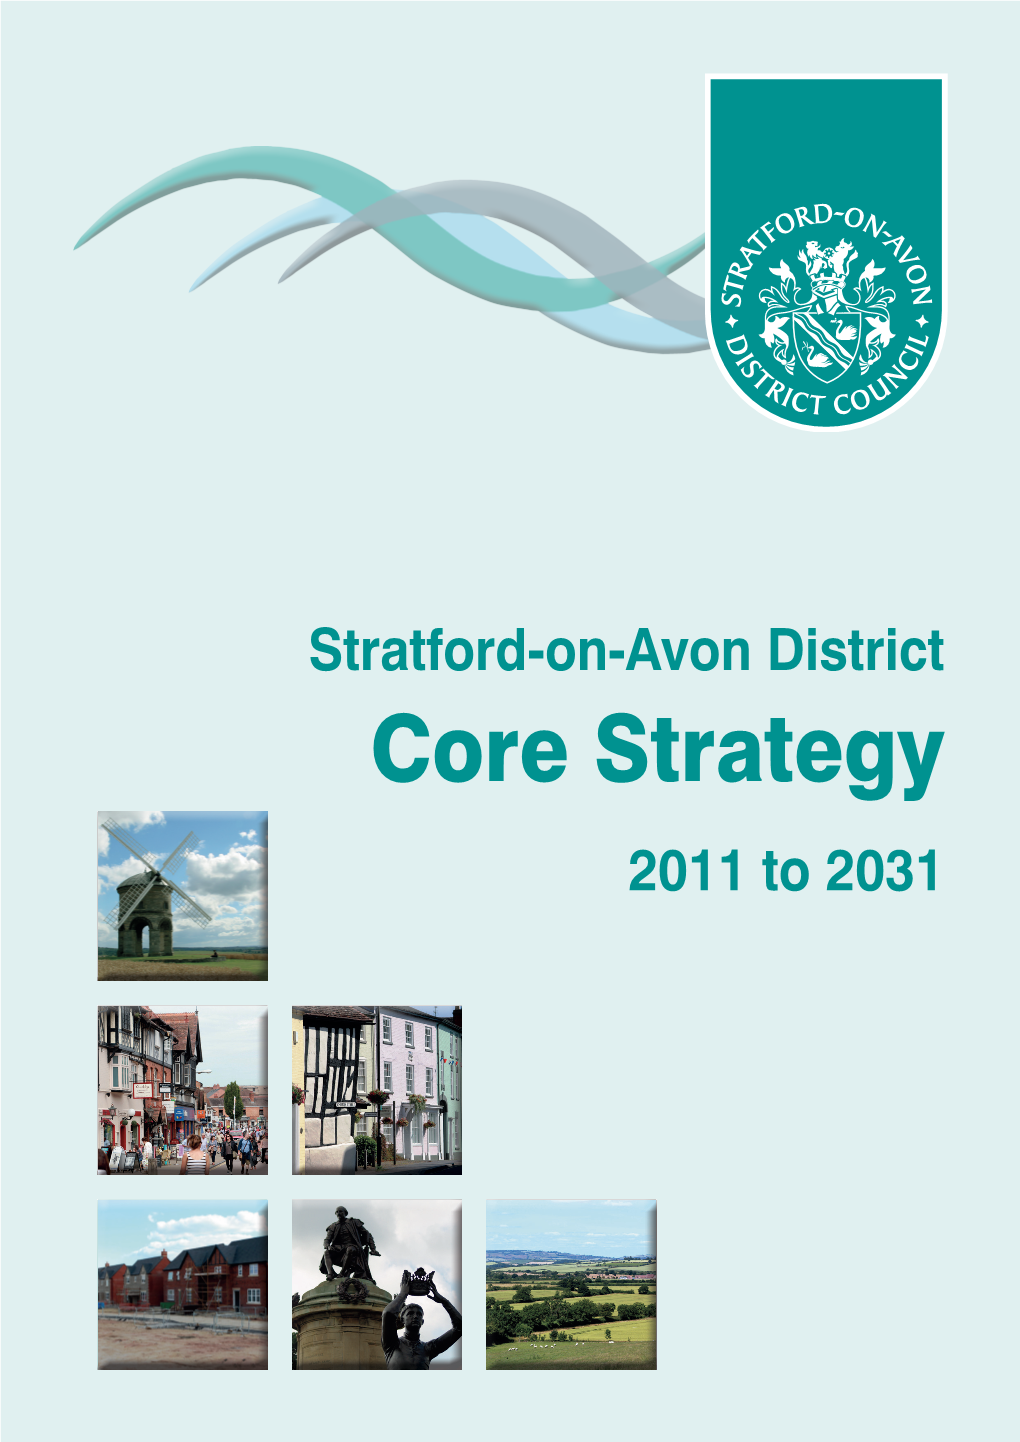 Core Strategy 2011 to 2031